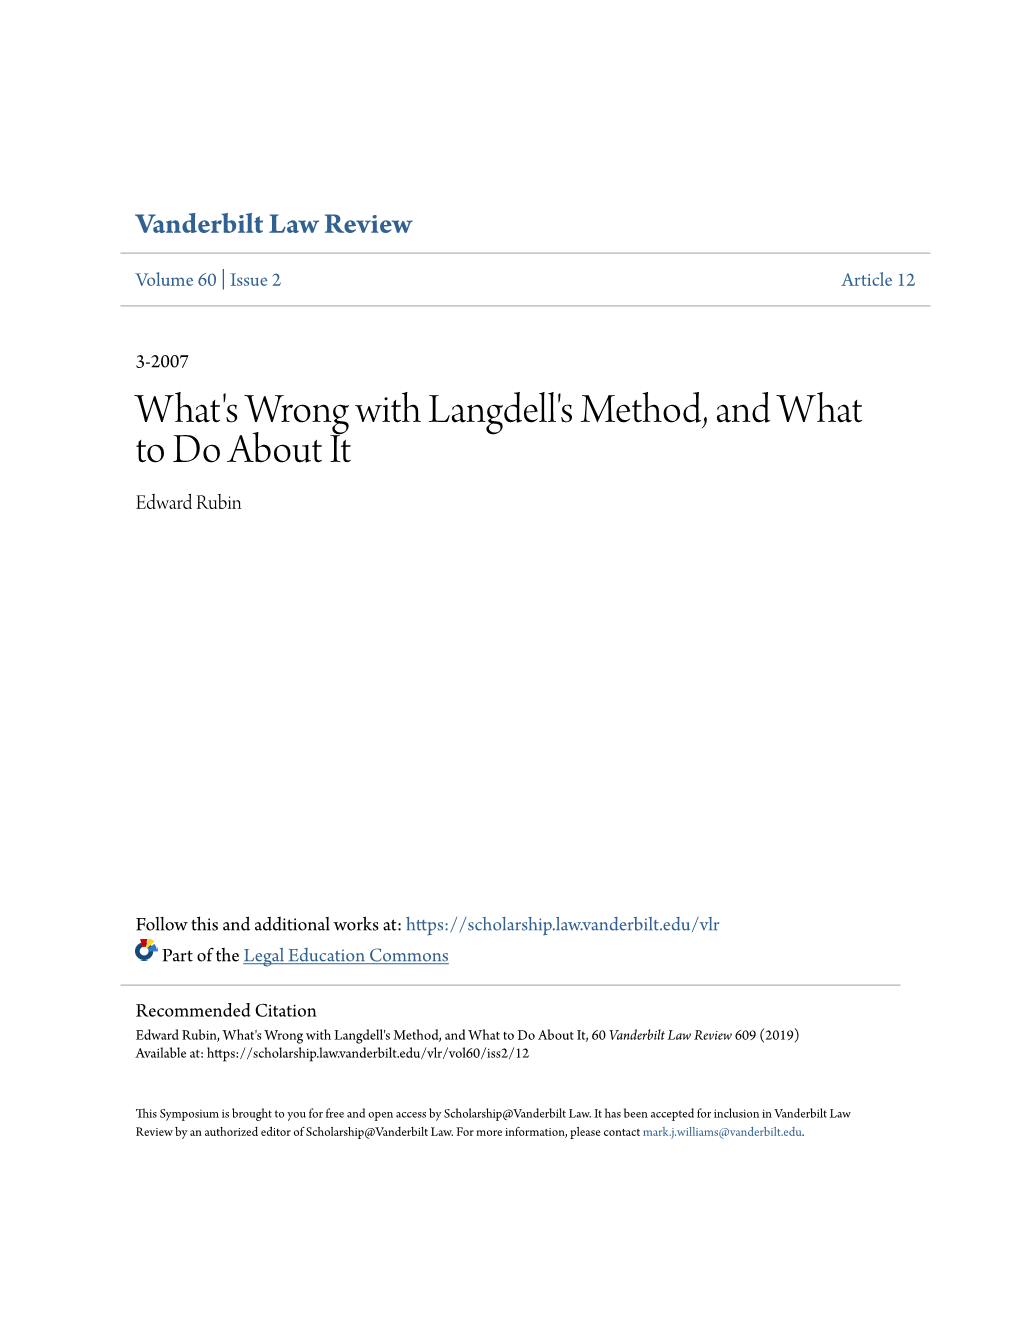 What's Wrong with Langdell's Method, and What to Do About It Edward Rubin